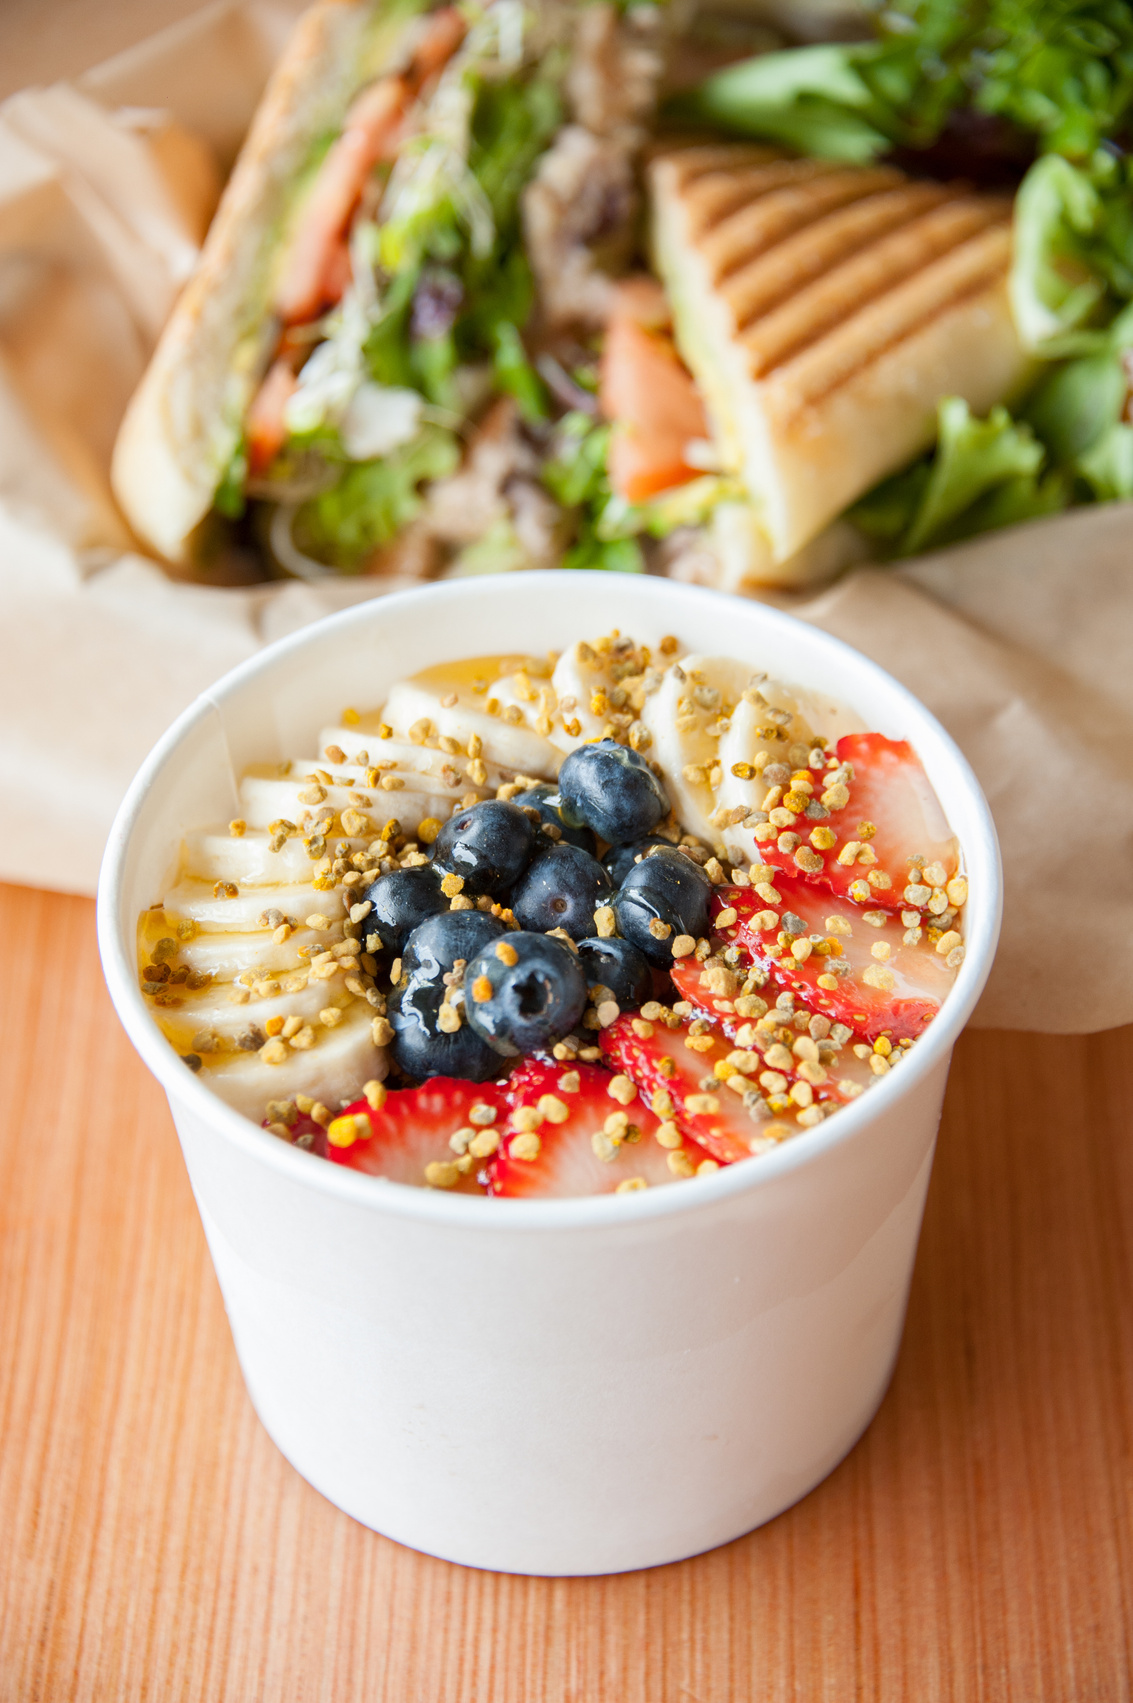 Acai Bowl and sandwich at cafe